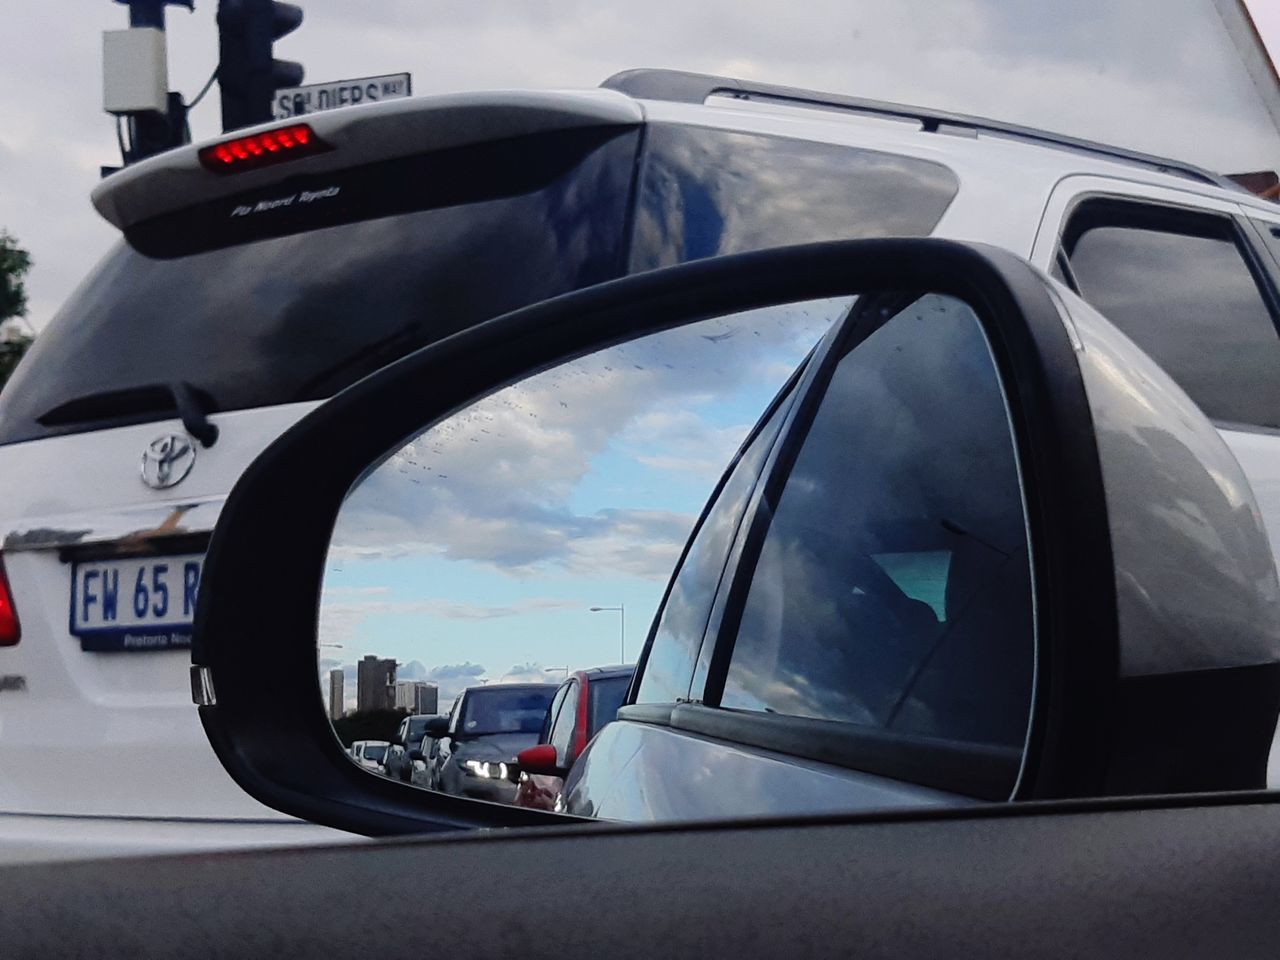 CLOSE-UP OF SIDE-VIEW MIRROR OF CAR